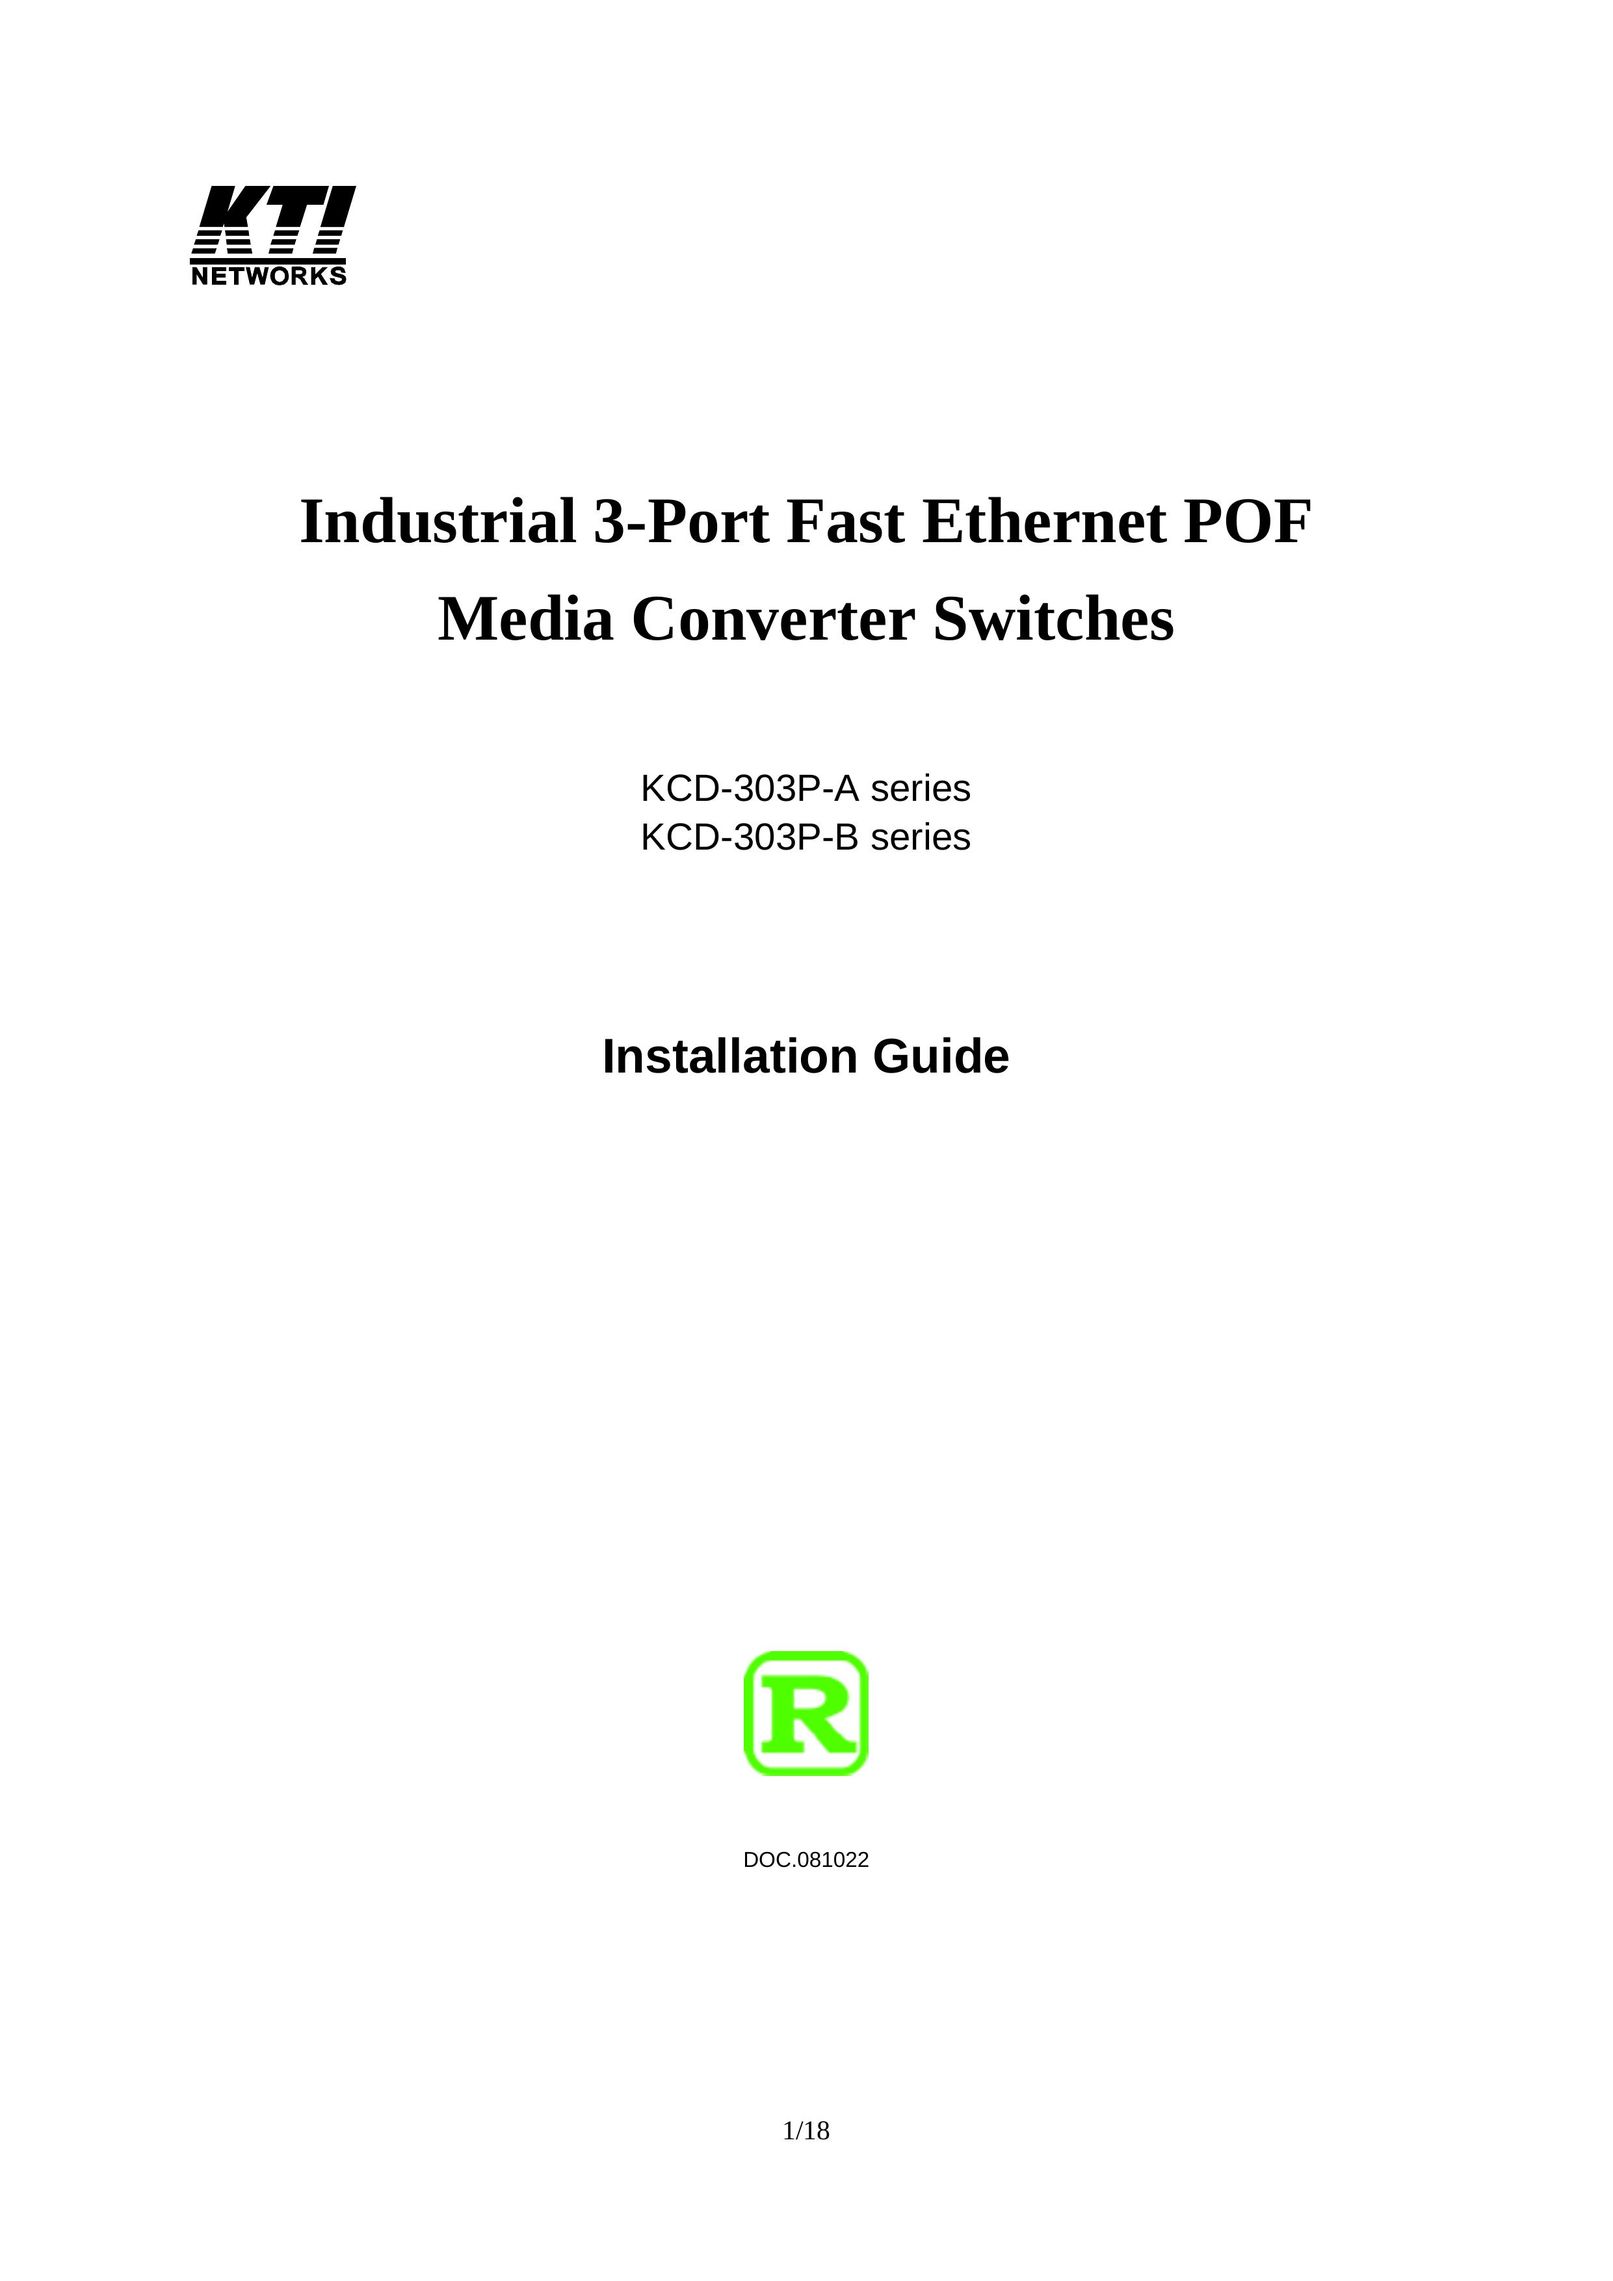 KTI Networks KCD-303P-A1 Switch User Manual